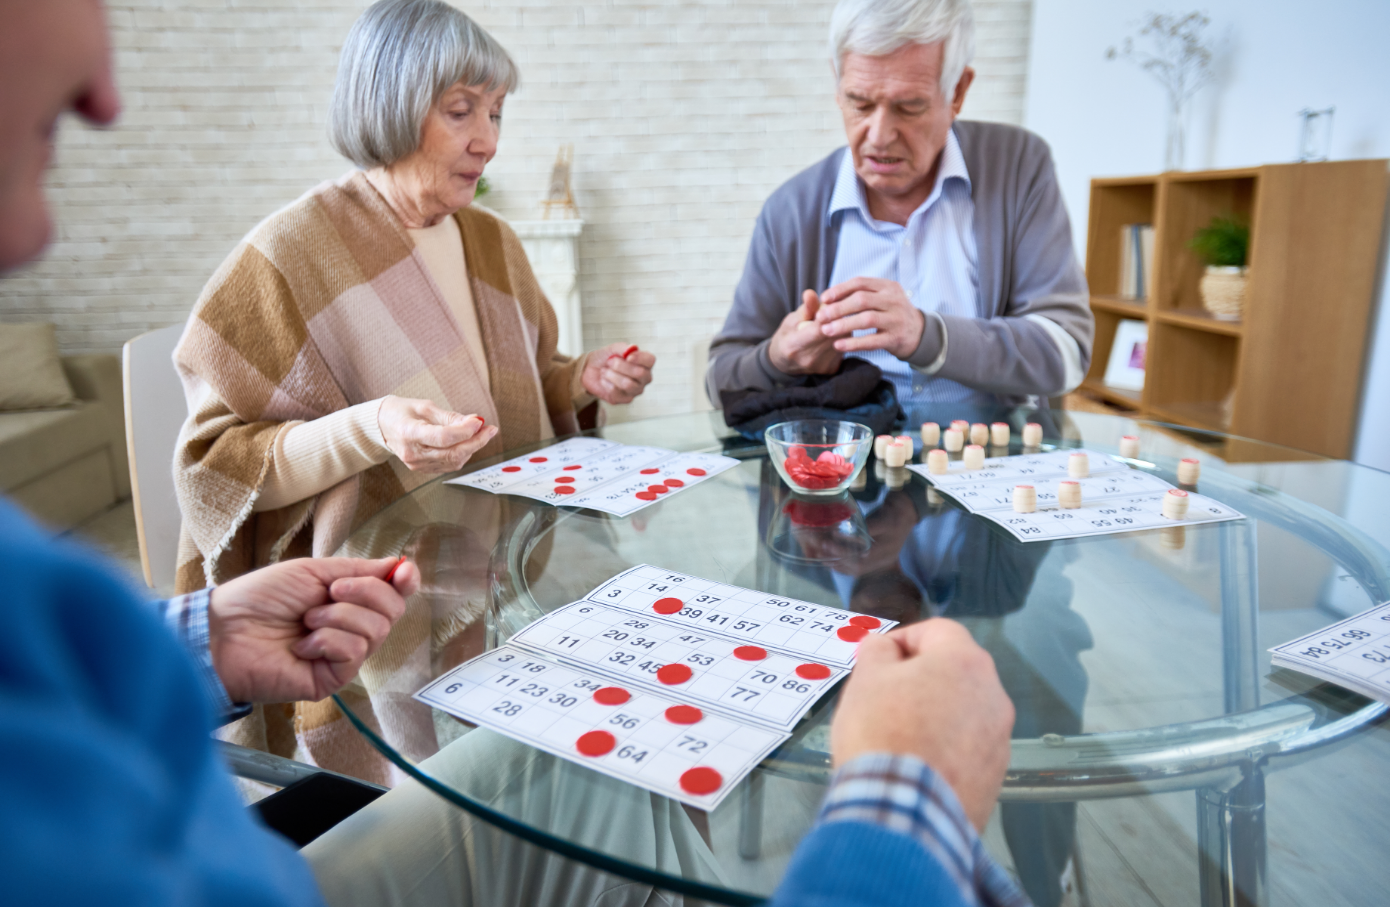 50+ Fun & Engaging Activity Ideas for Older Adults & Seniors